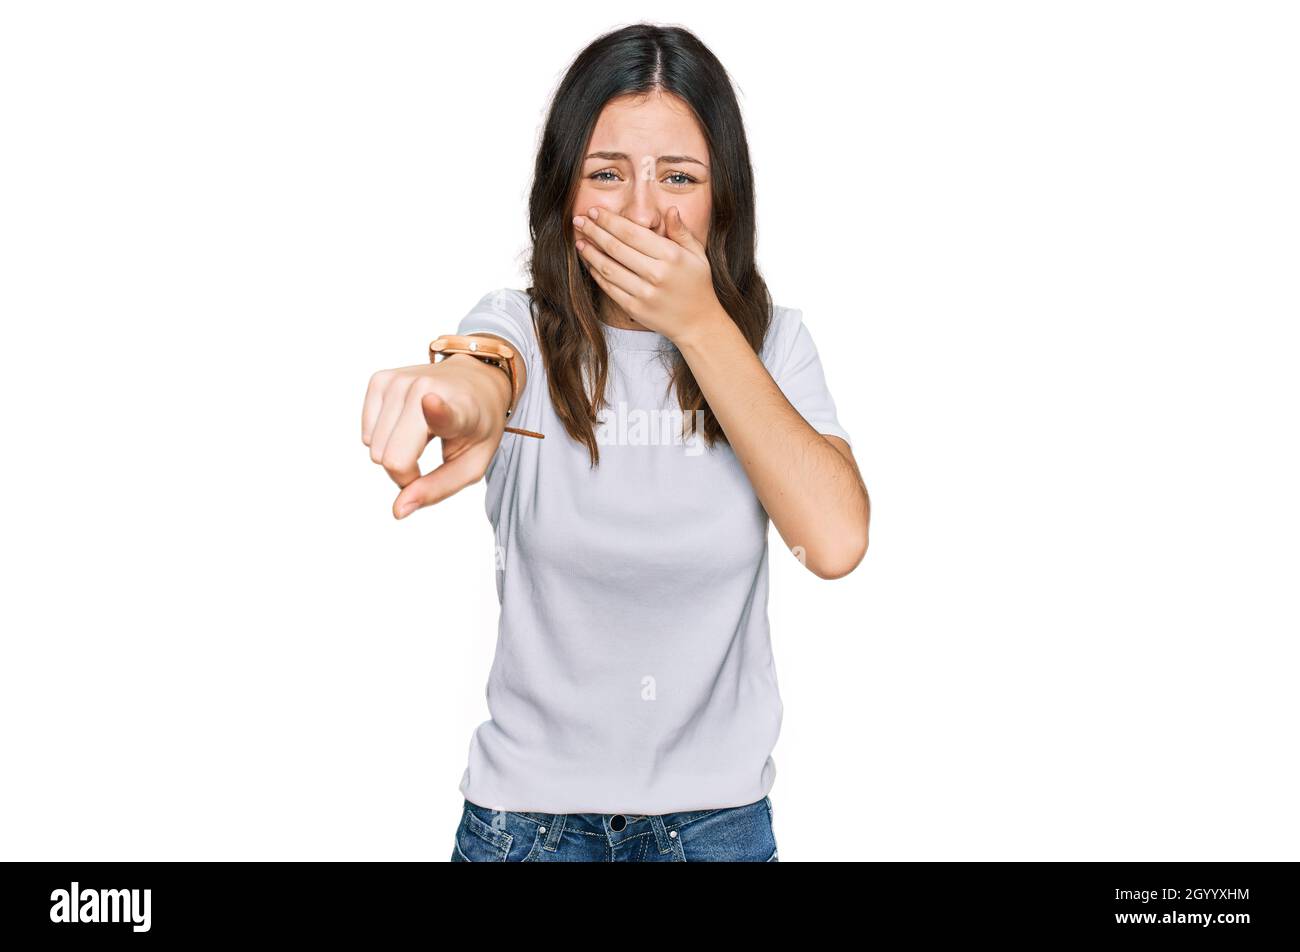 young-beautiful-woman-wearing-casual-white-t-shirt-laughing-at-you-pointing-finger-to-the-camera-with-hand-over-mouth-shame-expression-2GYYXHM.jpg